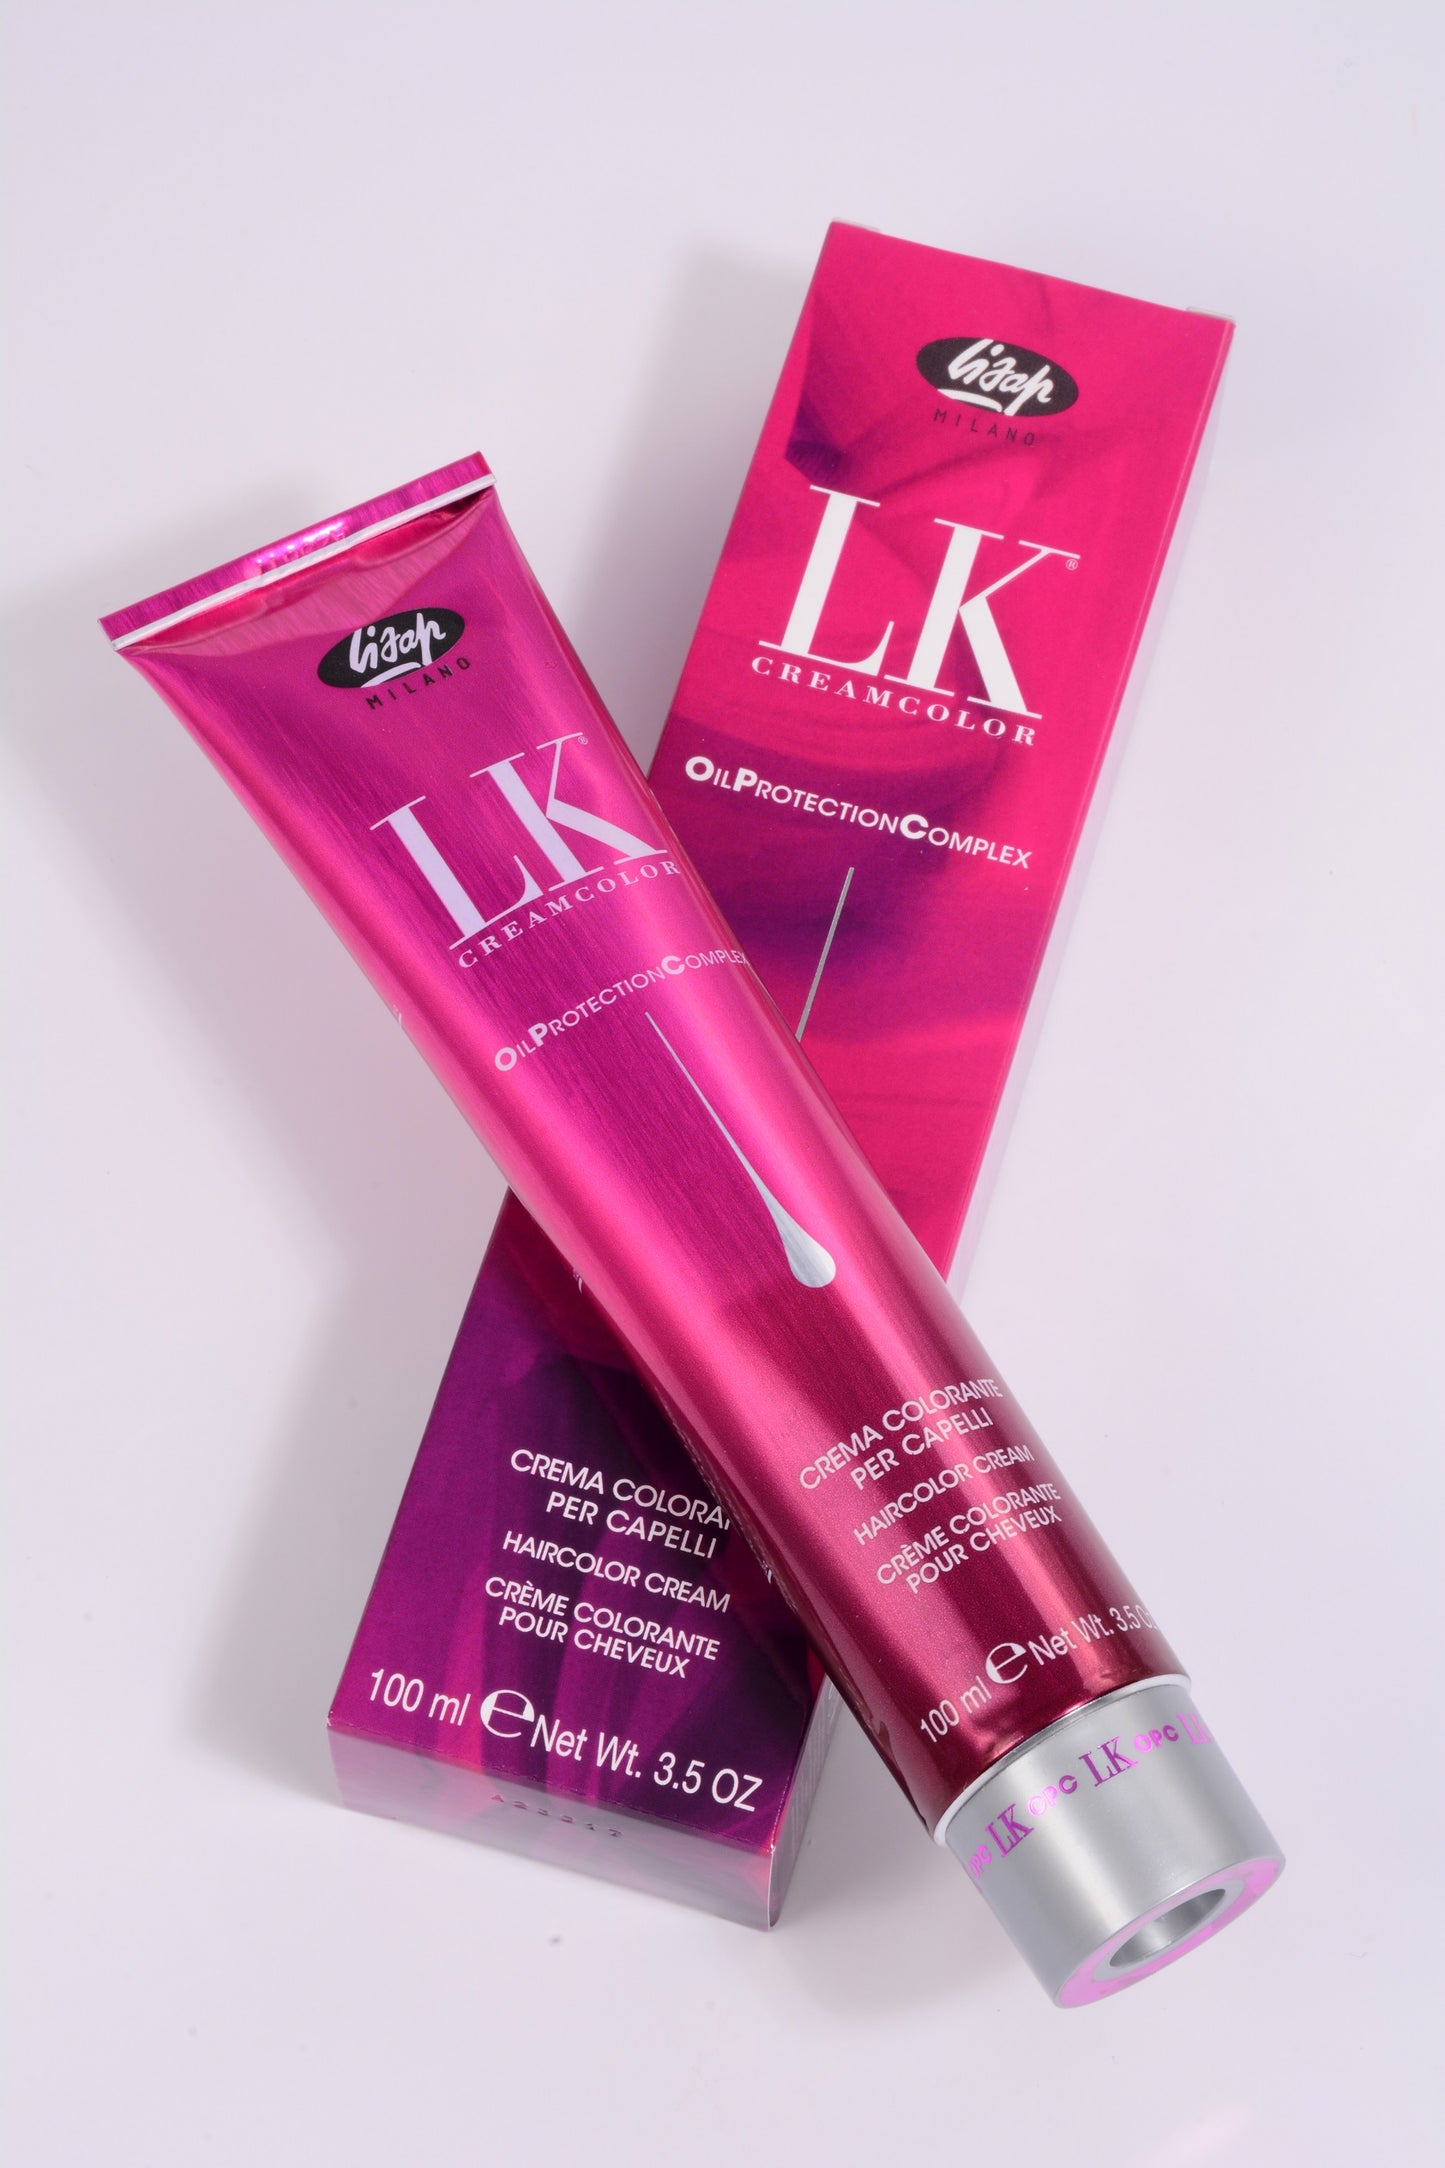 LK Creamcolor 7/66 Oil Protection Complex